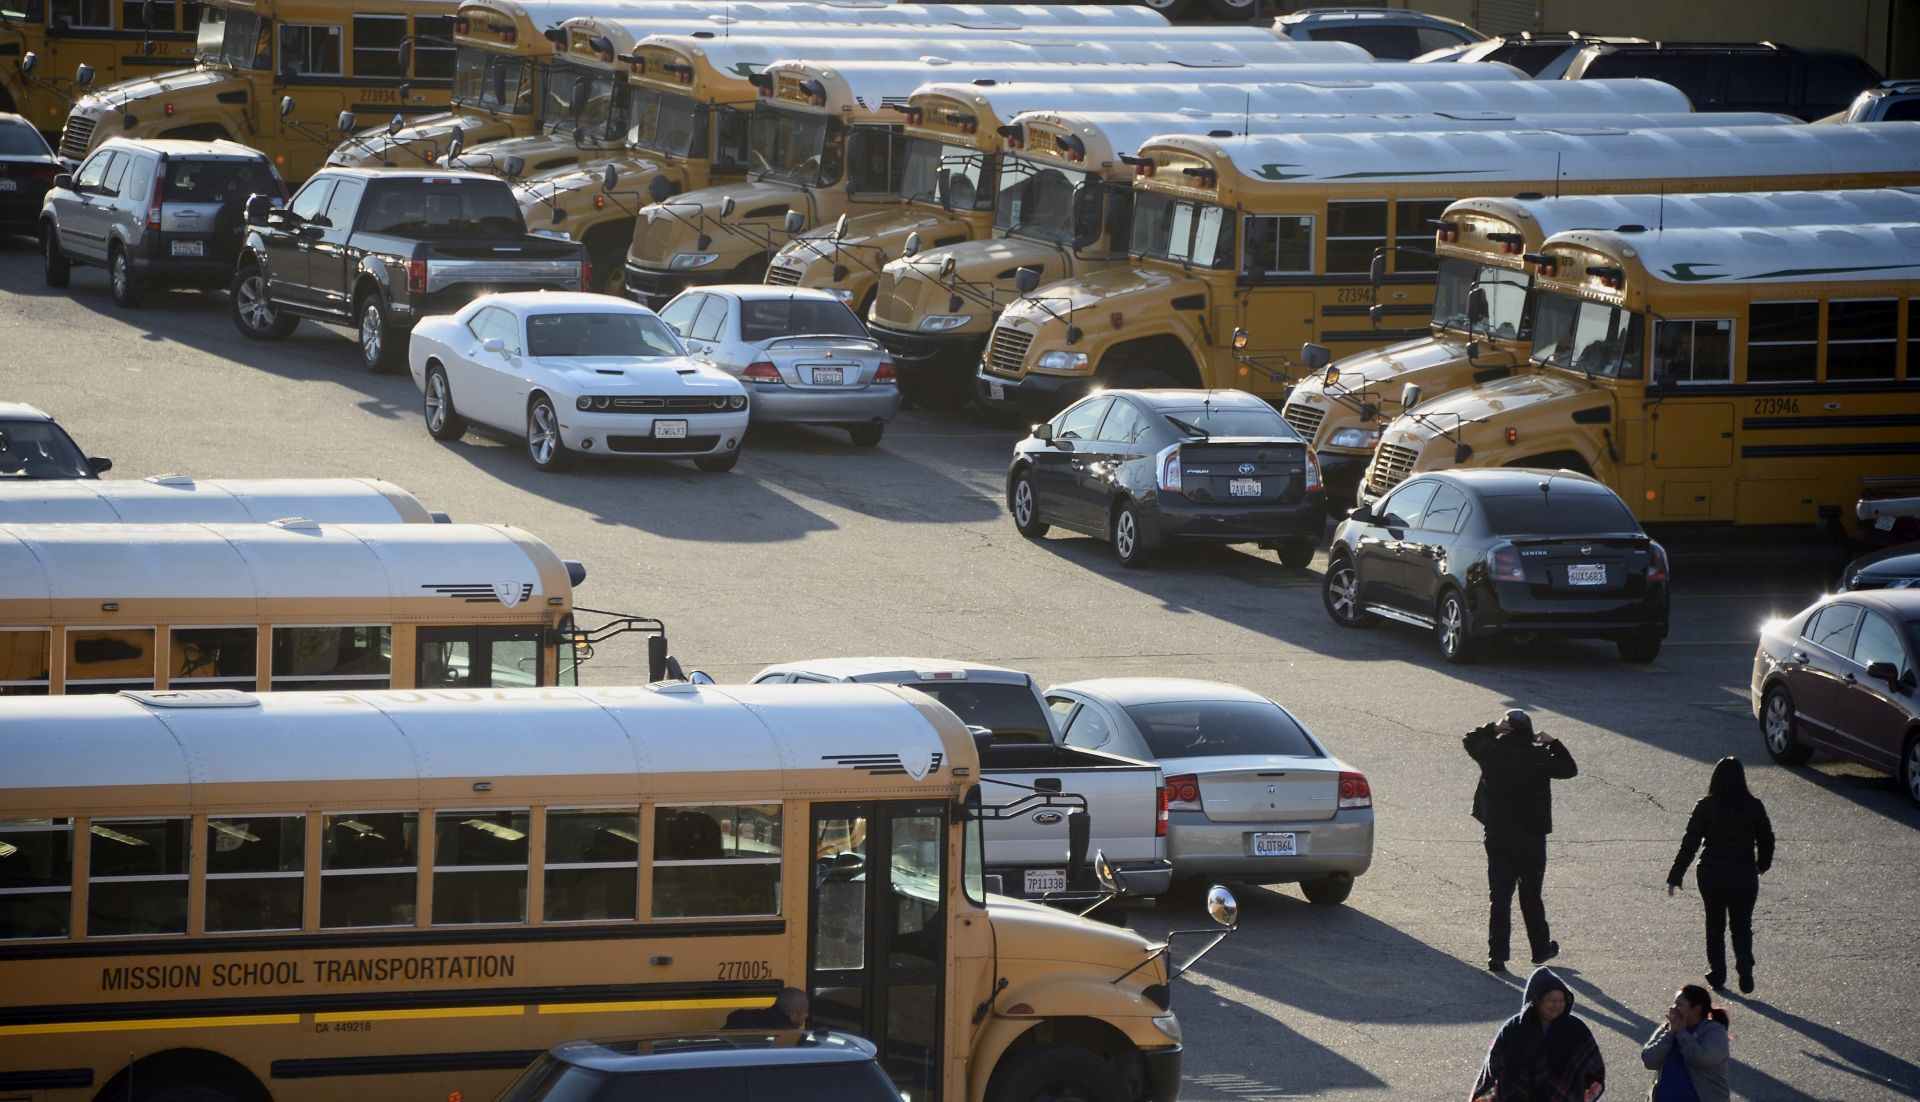 epa05070185 Los Angeles Unified school district buses and drivers sit idle following a credible threat in Los Angeles, California, USA 15 December 2015. More than 600,000 pupils in Los Angeles were being sent home or told not to come to school after officials received a 'credible threat.' The second-largest US school district made the decision after receiving an electronic threat against 'many schools in the district,' Superintendent Ramon Cortines said.  EPA/PAUL BUCK